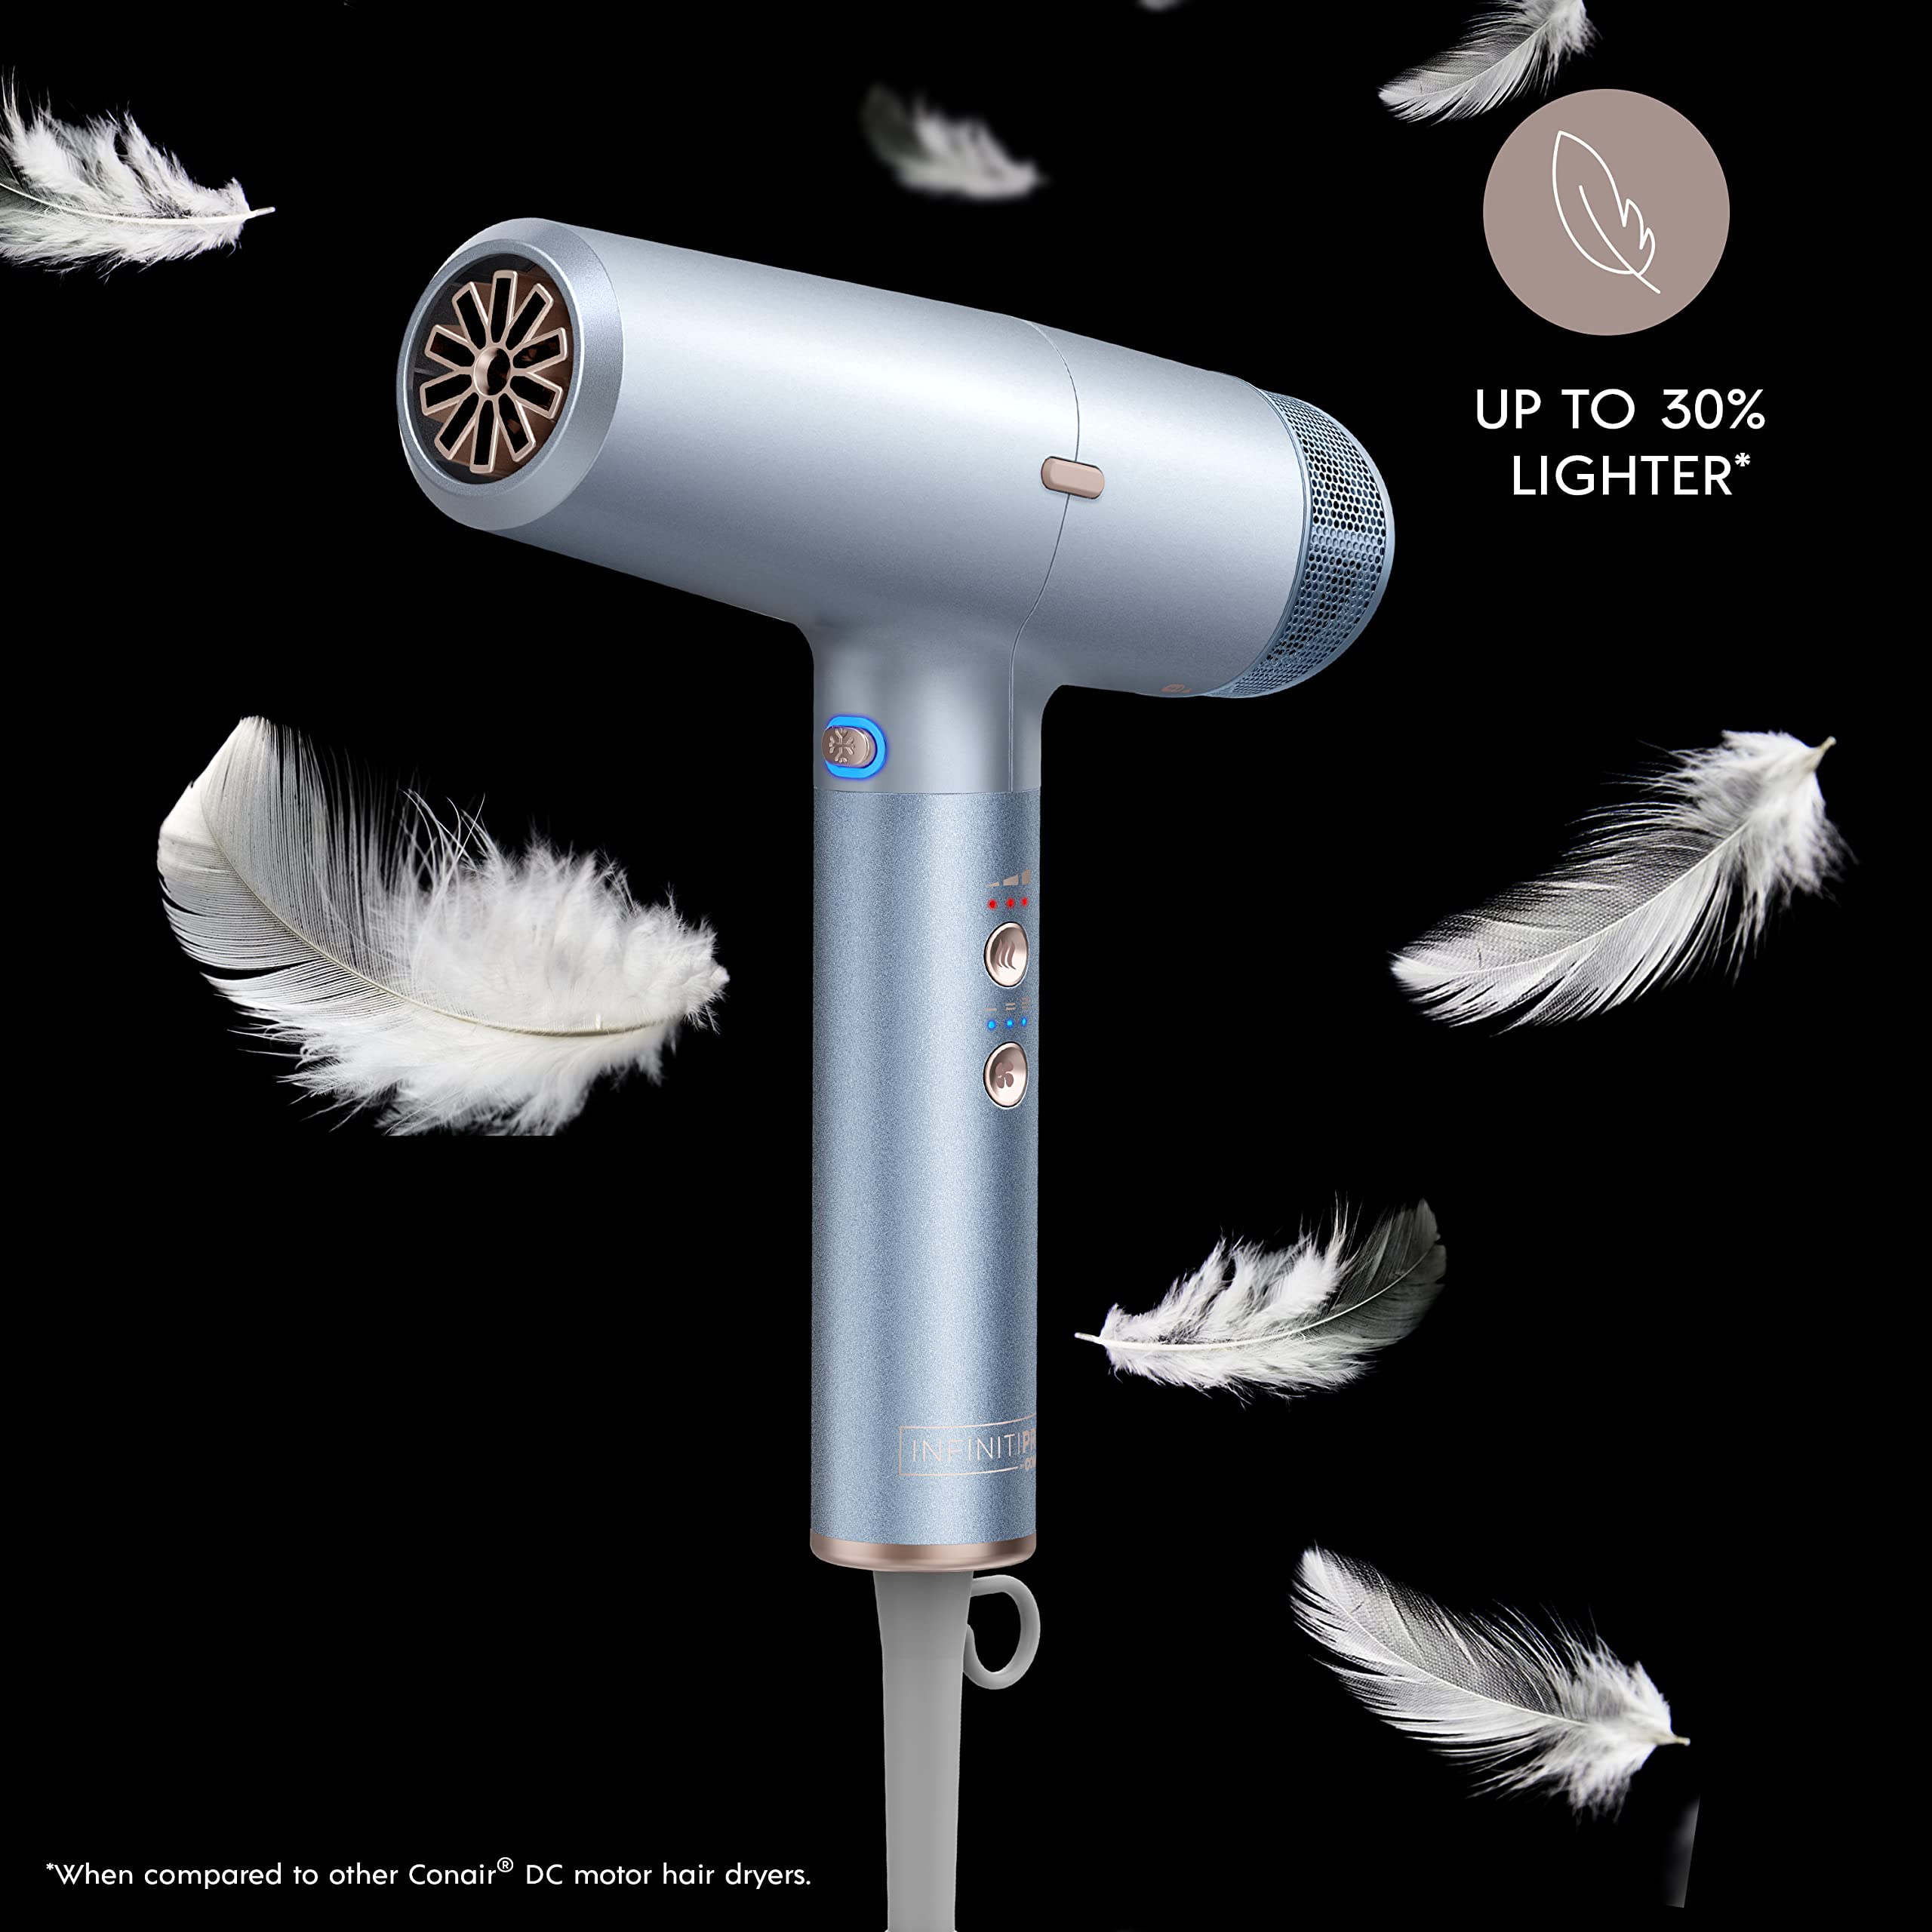 INFINITIPRO by CONAIR DigitalAIRE Hair Dryer, 1875W Hair Dryer with Diffuser, Digital Motor Spins up to 90,000 RPMs for up to 5X More Speed Plus Honeycomb Ceramic Technology Helps Prevent hotspots